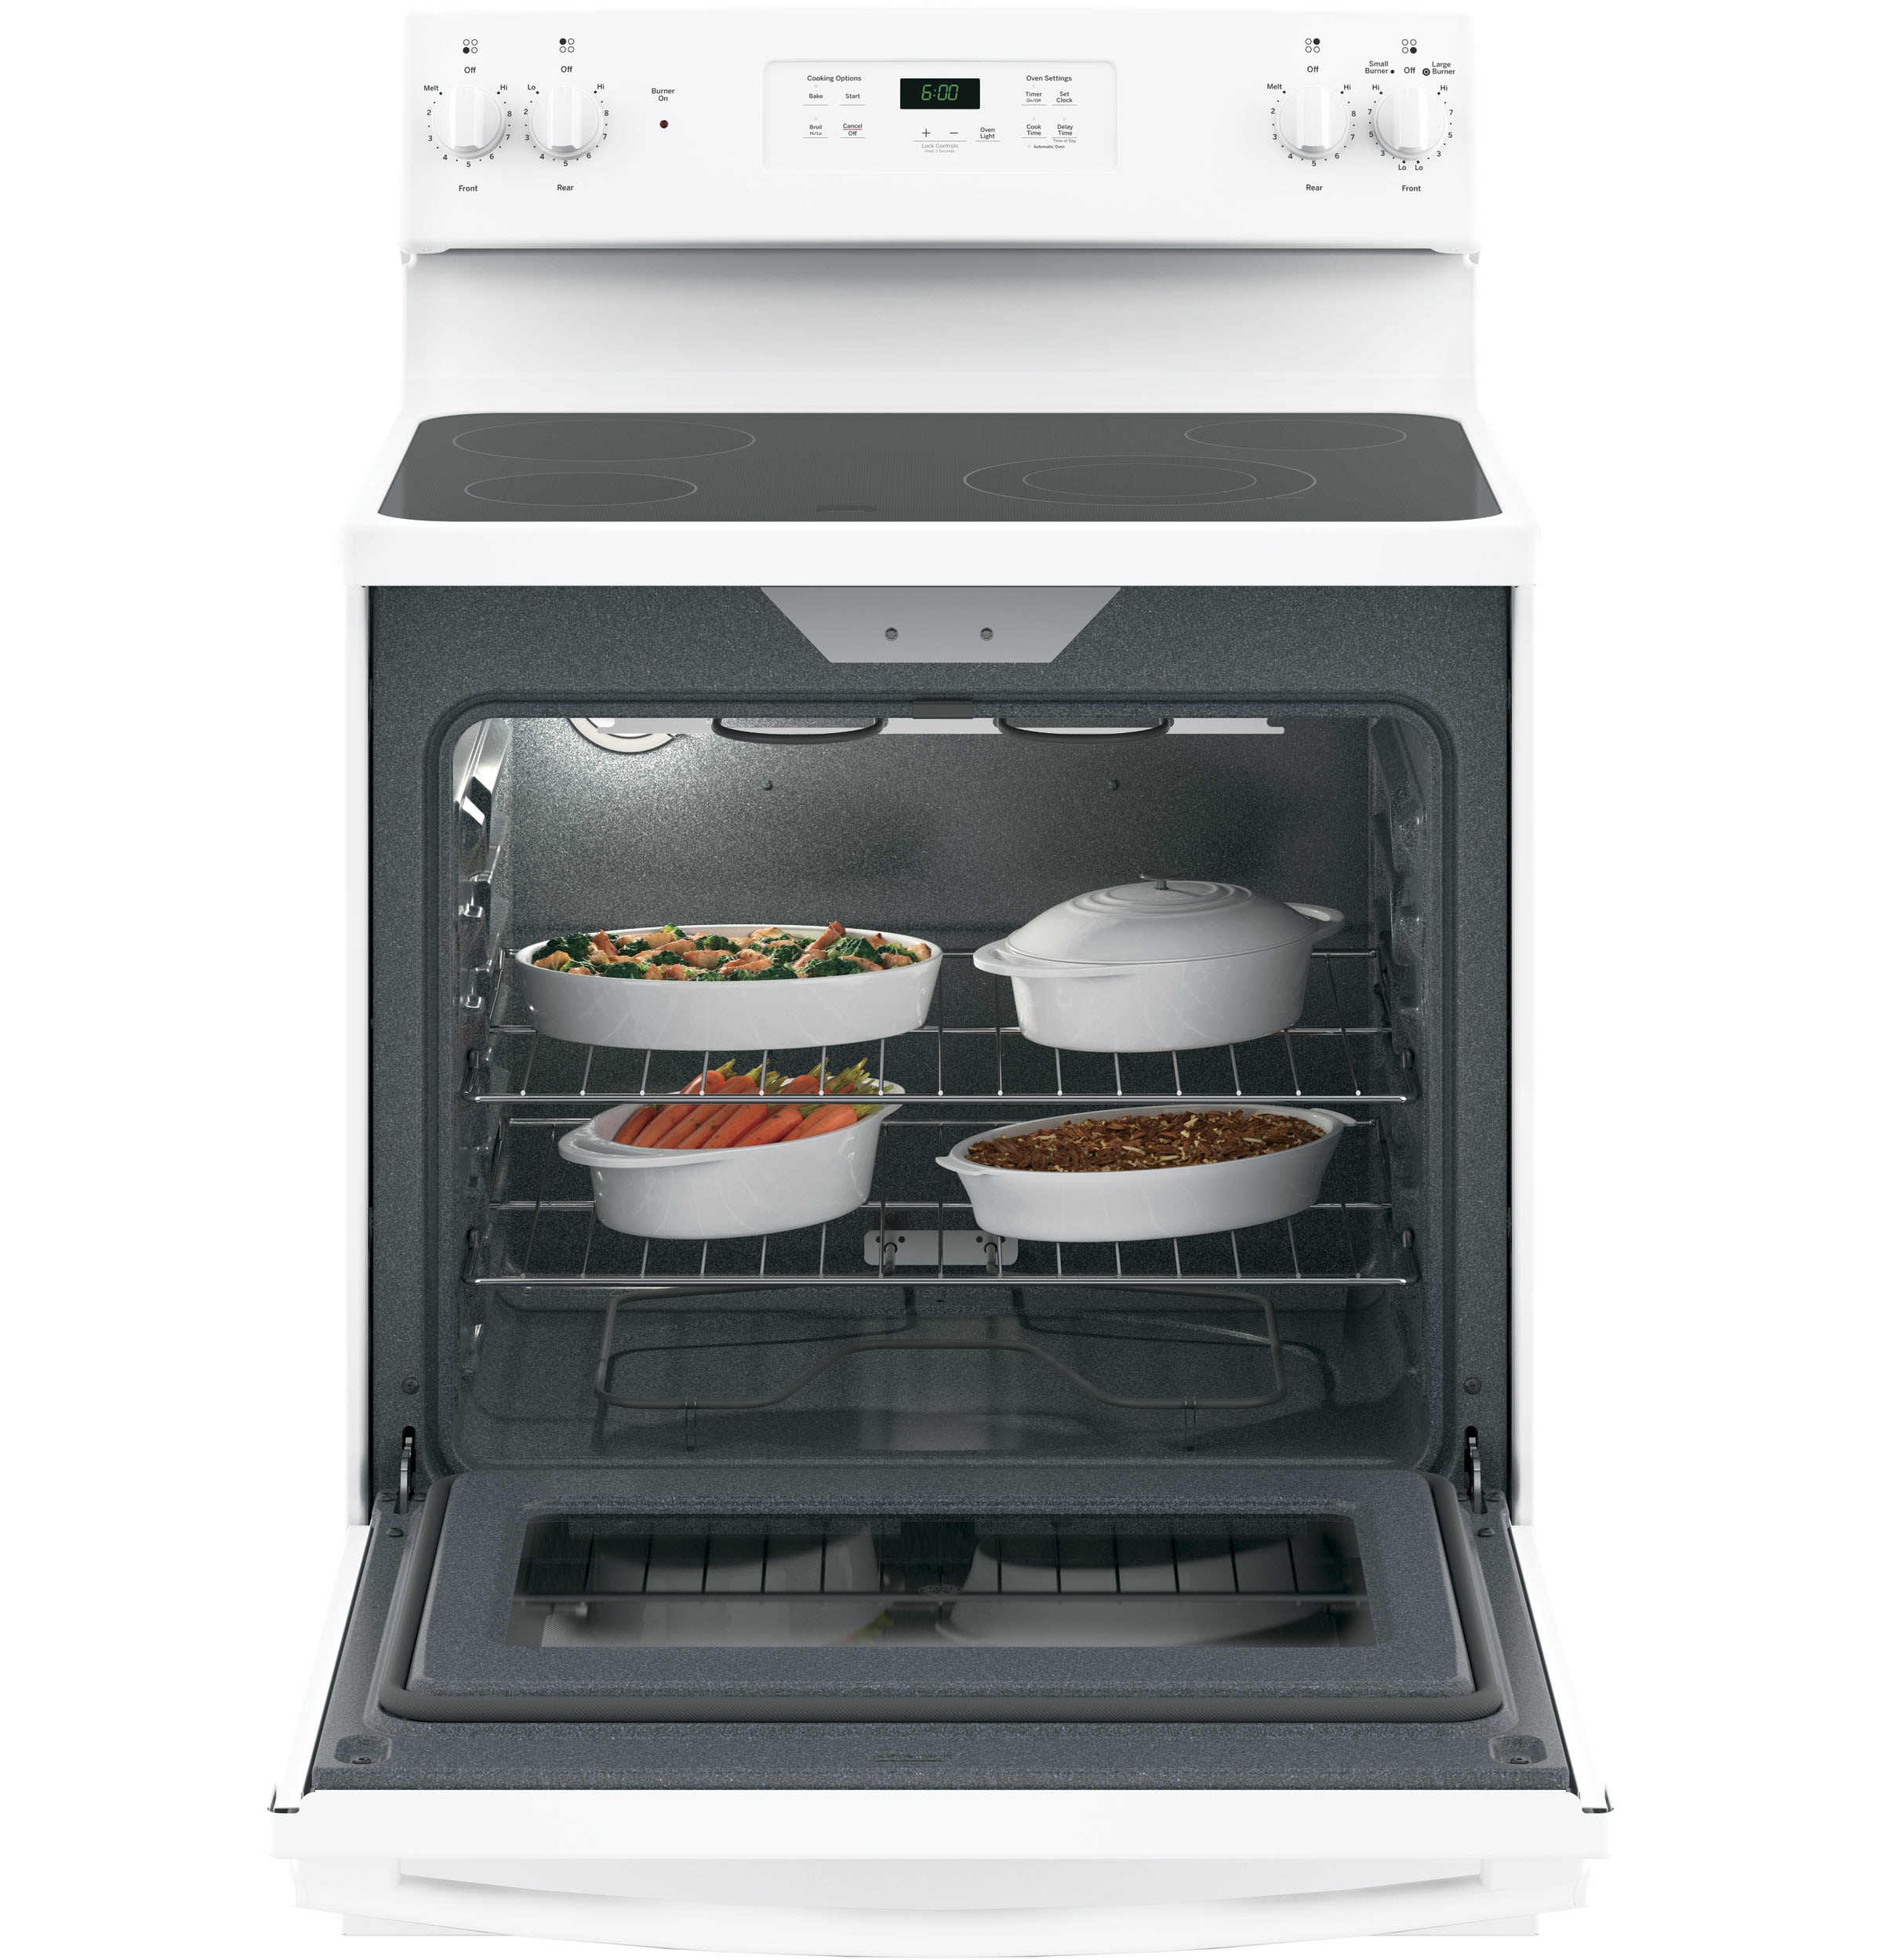 Amana 2.6 cu. ft. Electric Range in White AEP222VAW - The Home Depot